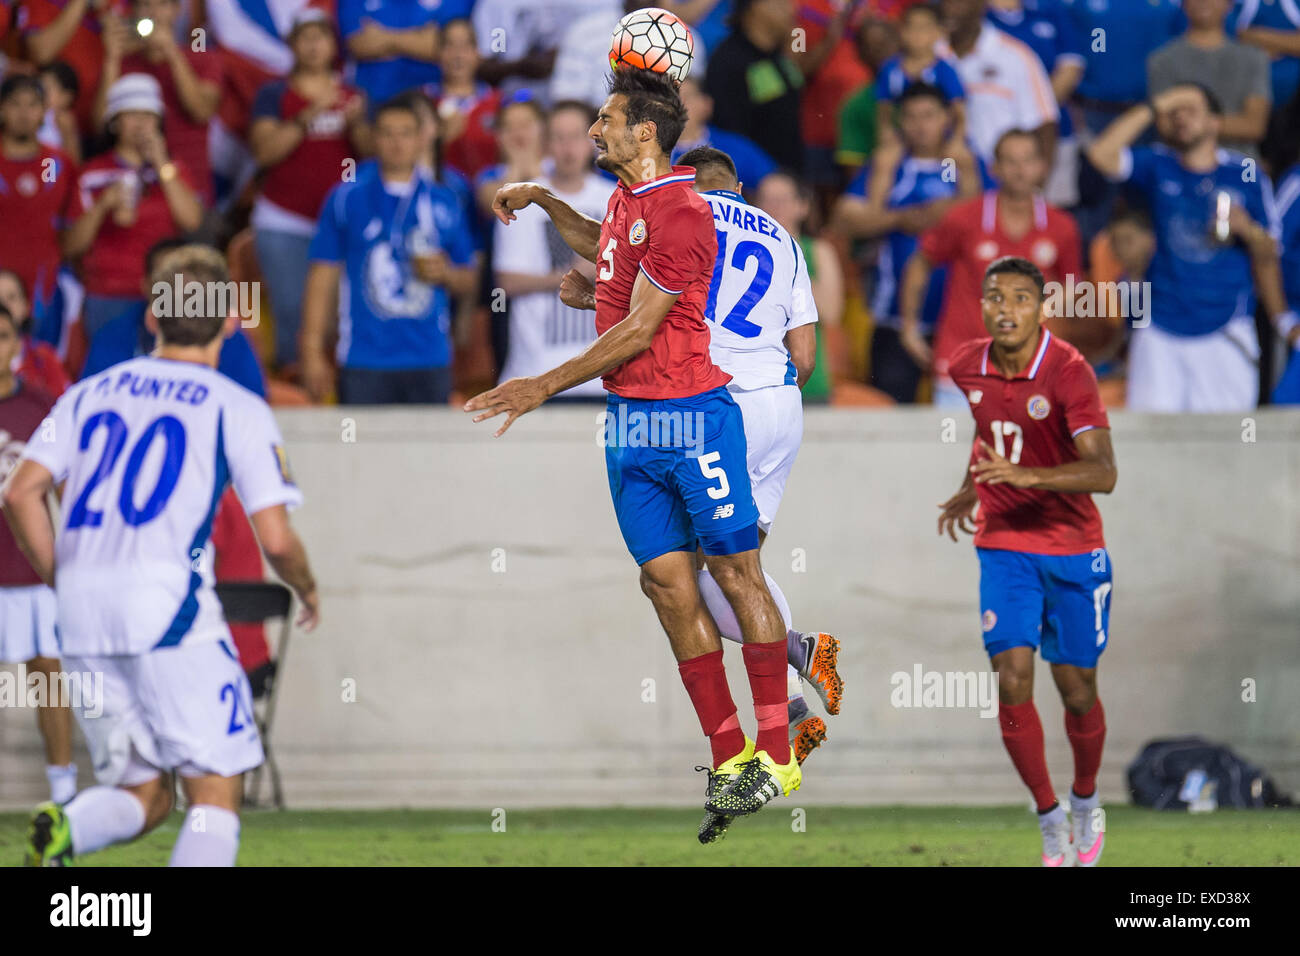 July 11, 2015: Costa Rica midfielder Celso Borges (5) and El Salvador midfielder Arturo Alvarez (12) battle for a header during the 2nd half of an international CONCACAF Gold Cup soccer match between Costa Rica and El Salvador at BBVA Compass Stadium in Houston, TX. The game ended in a 1-1 draw. Credit:  Cal Sport Media/Alamy Live News Stock Photo